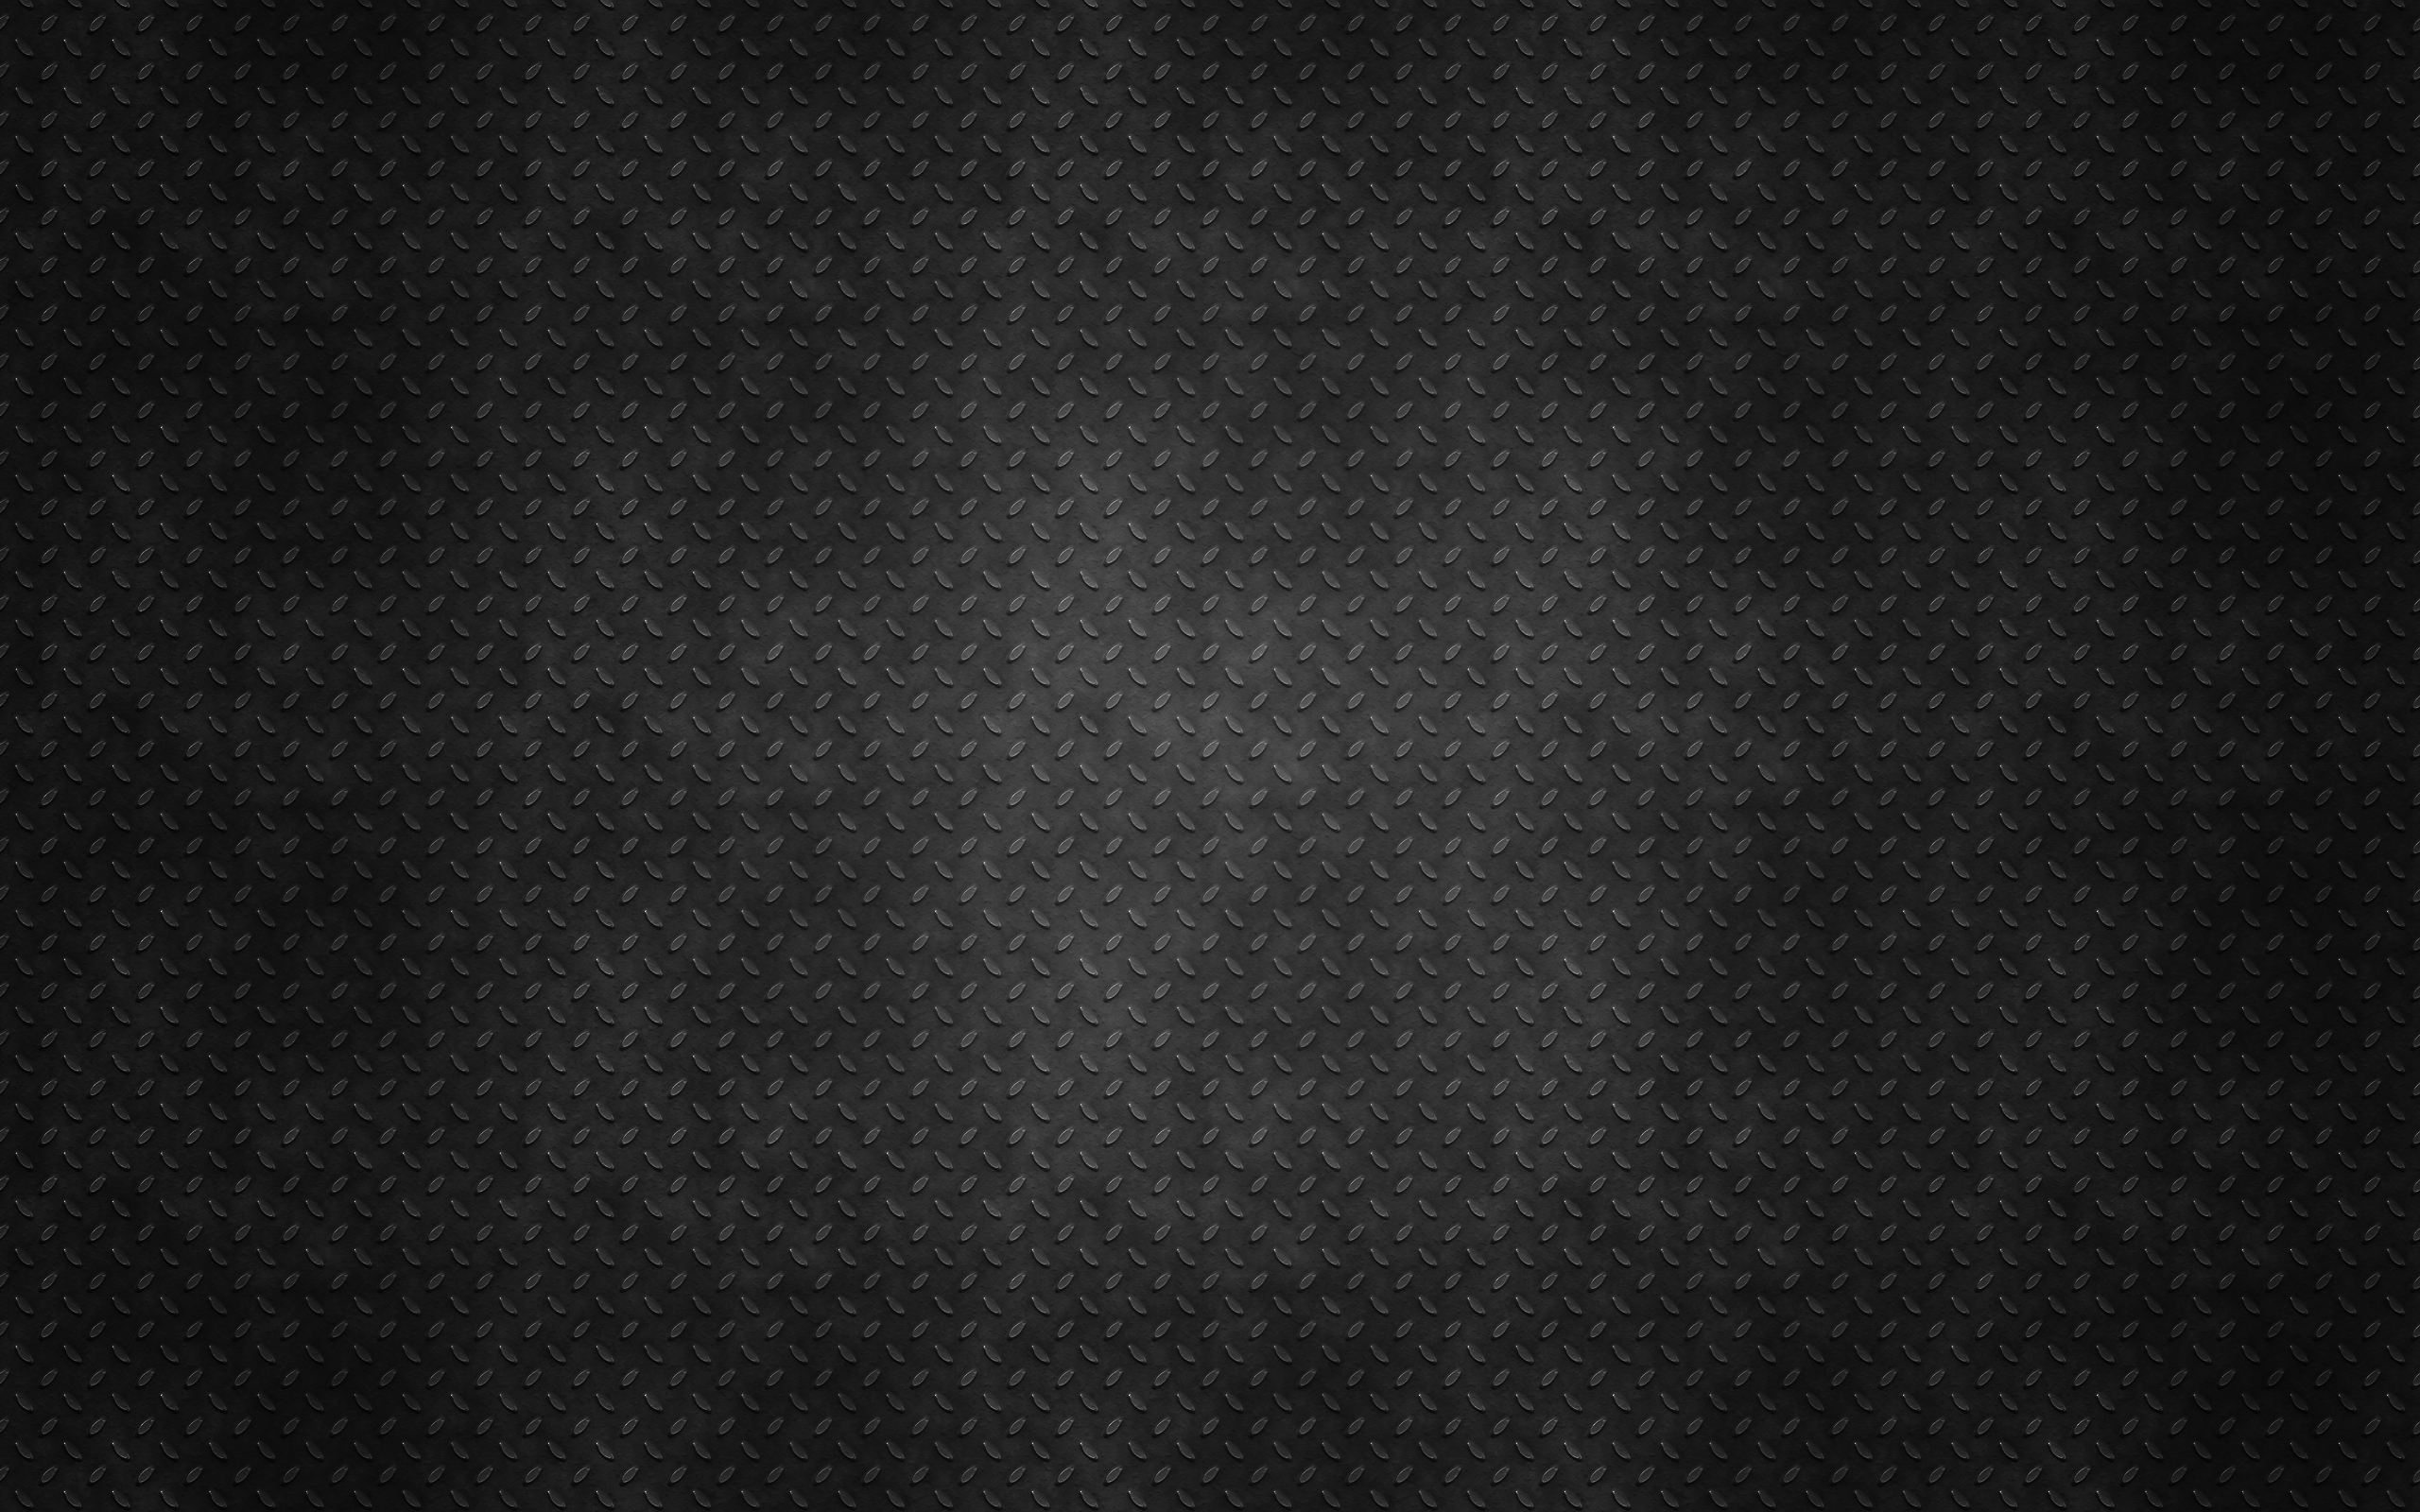 Black-Background-Metal-texture-wallpaper-1280×720 | Abstract hd ...